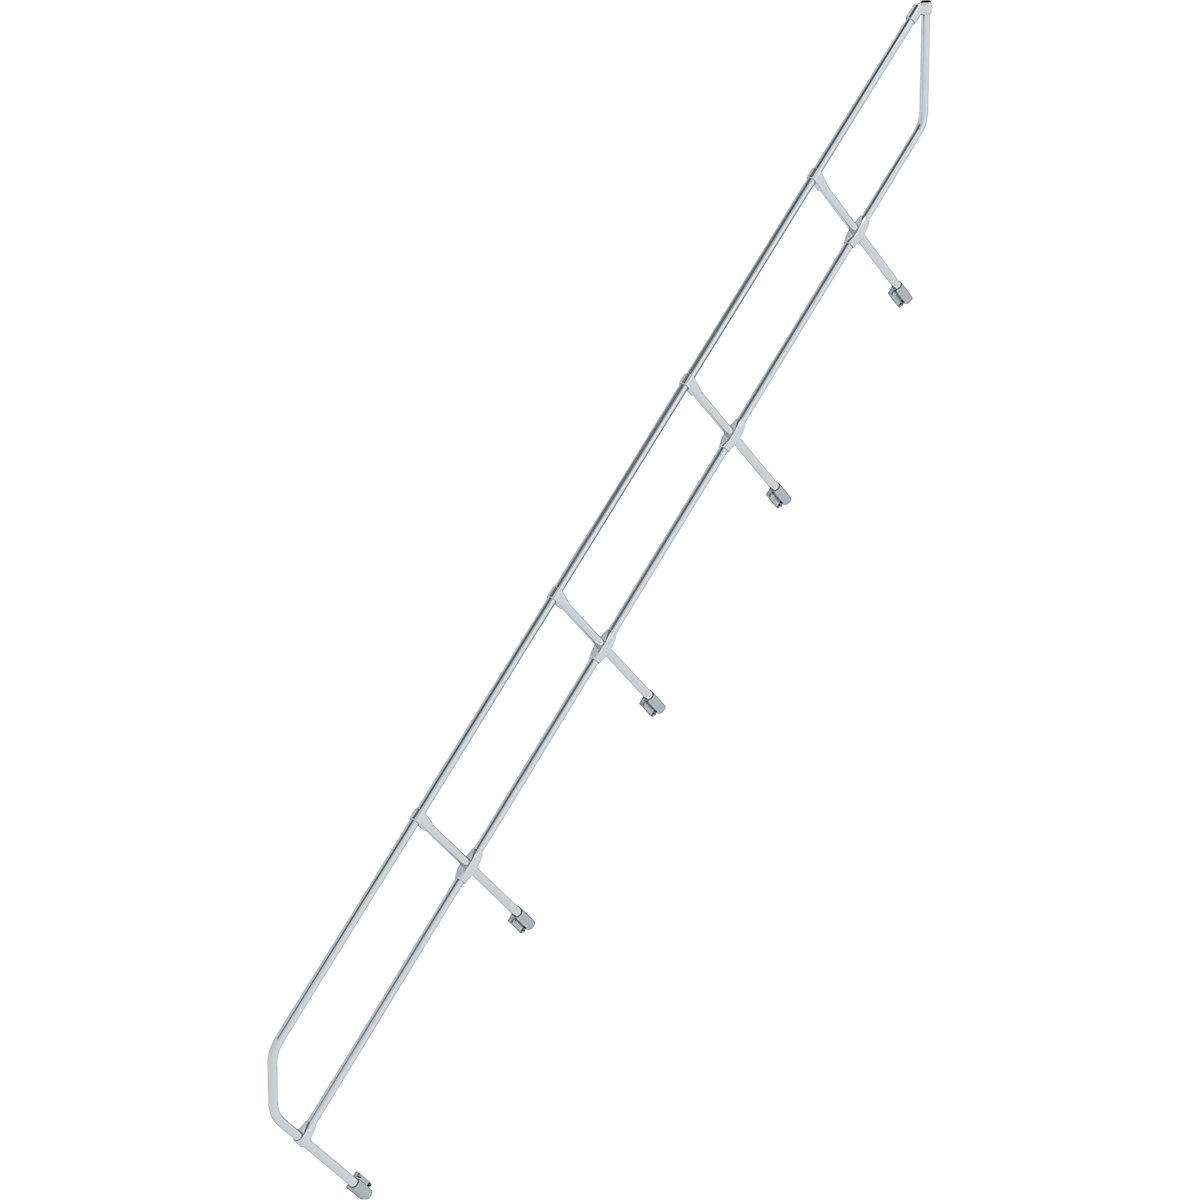 Second railing – MUNK, for industrial steps with a 45° slope, 16 steps-2